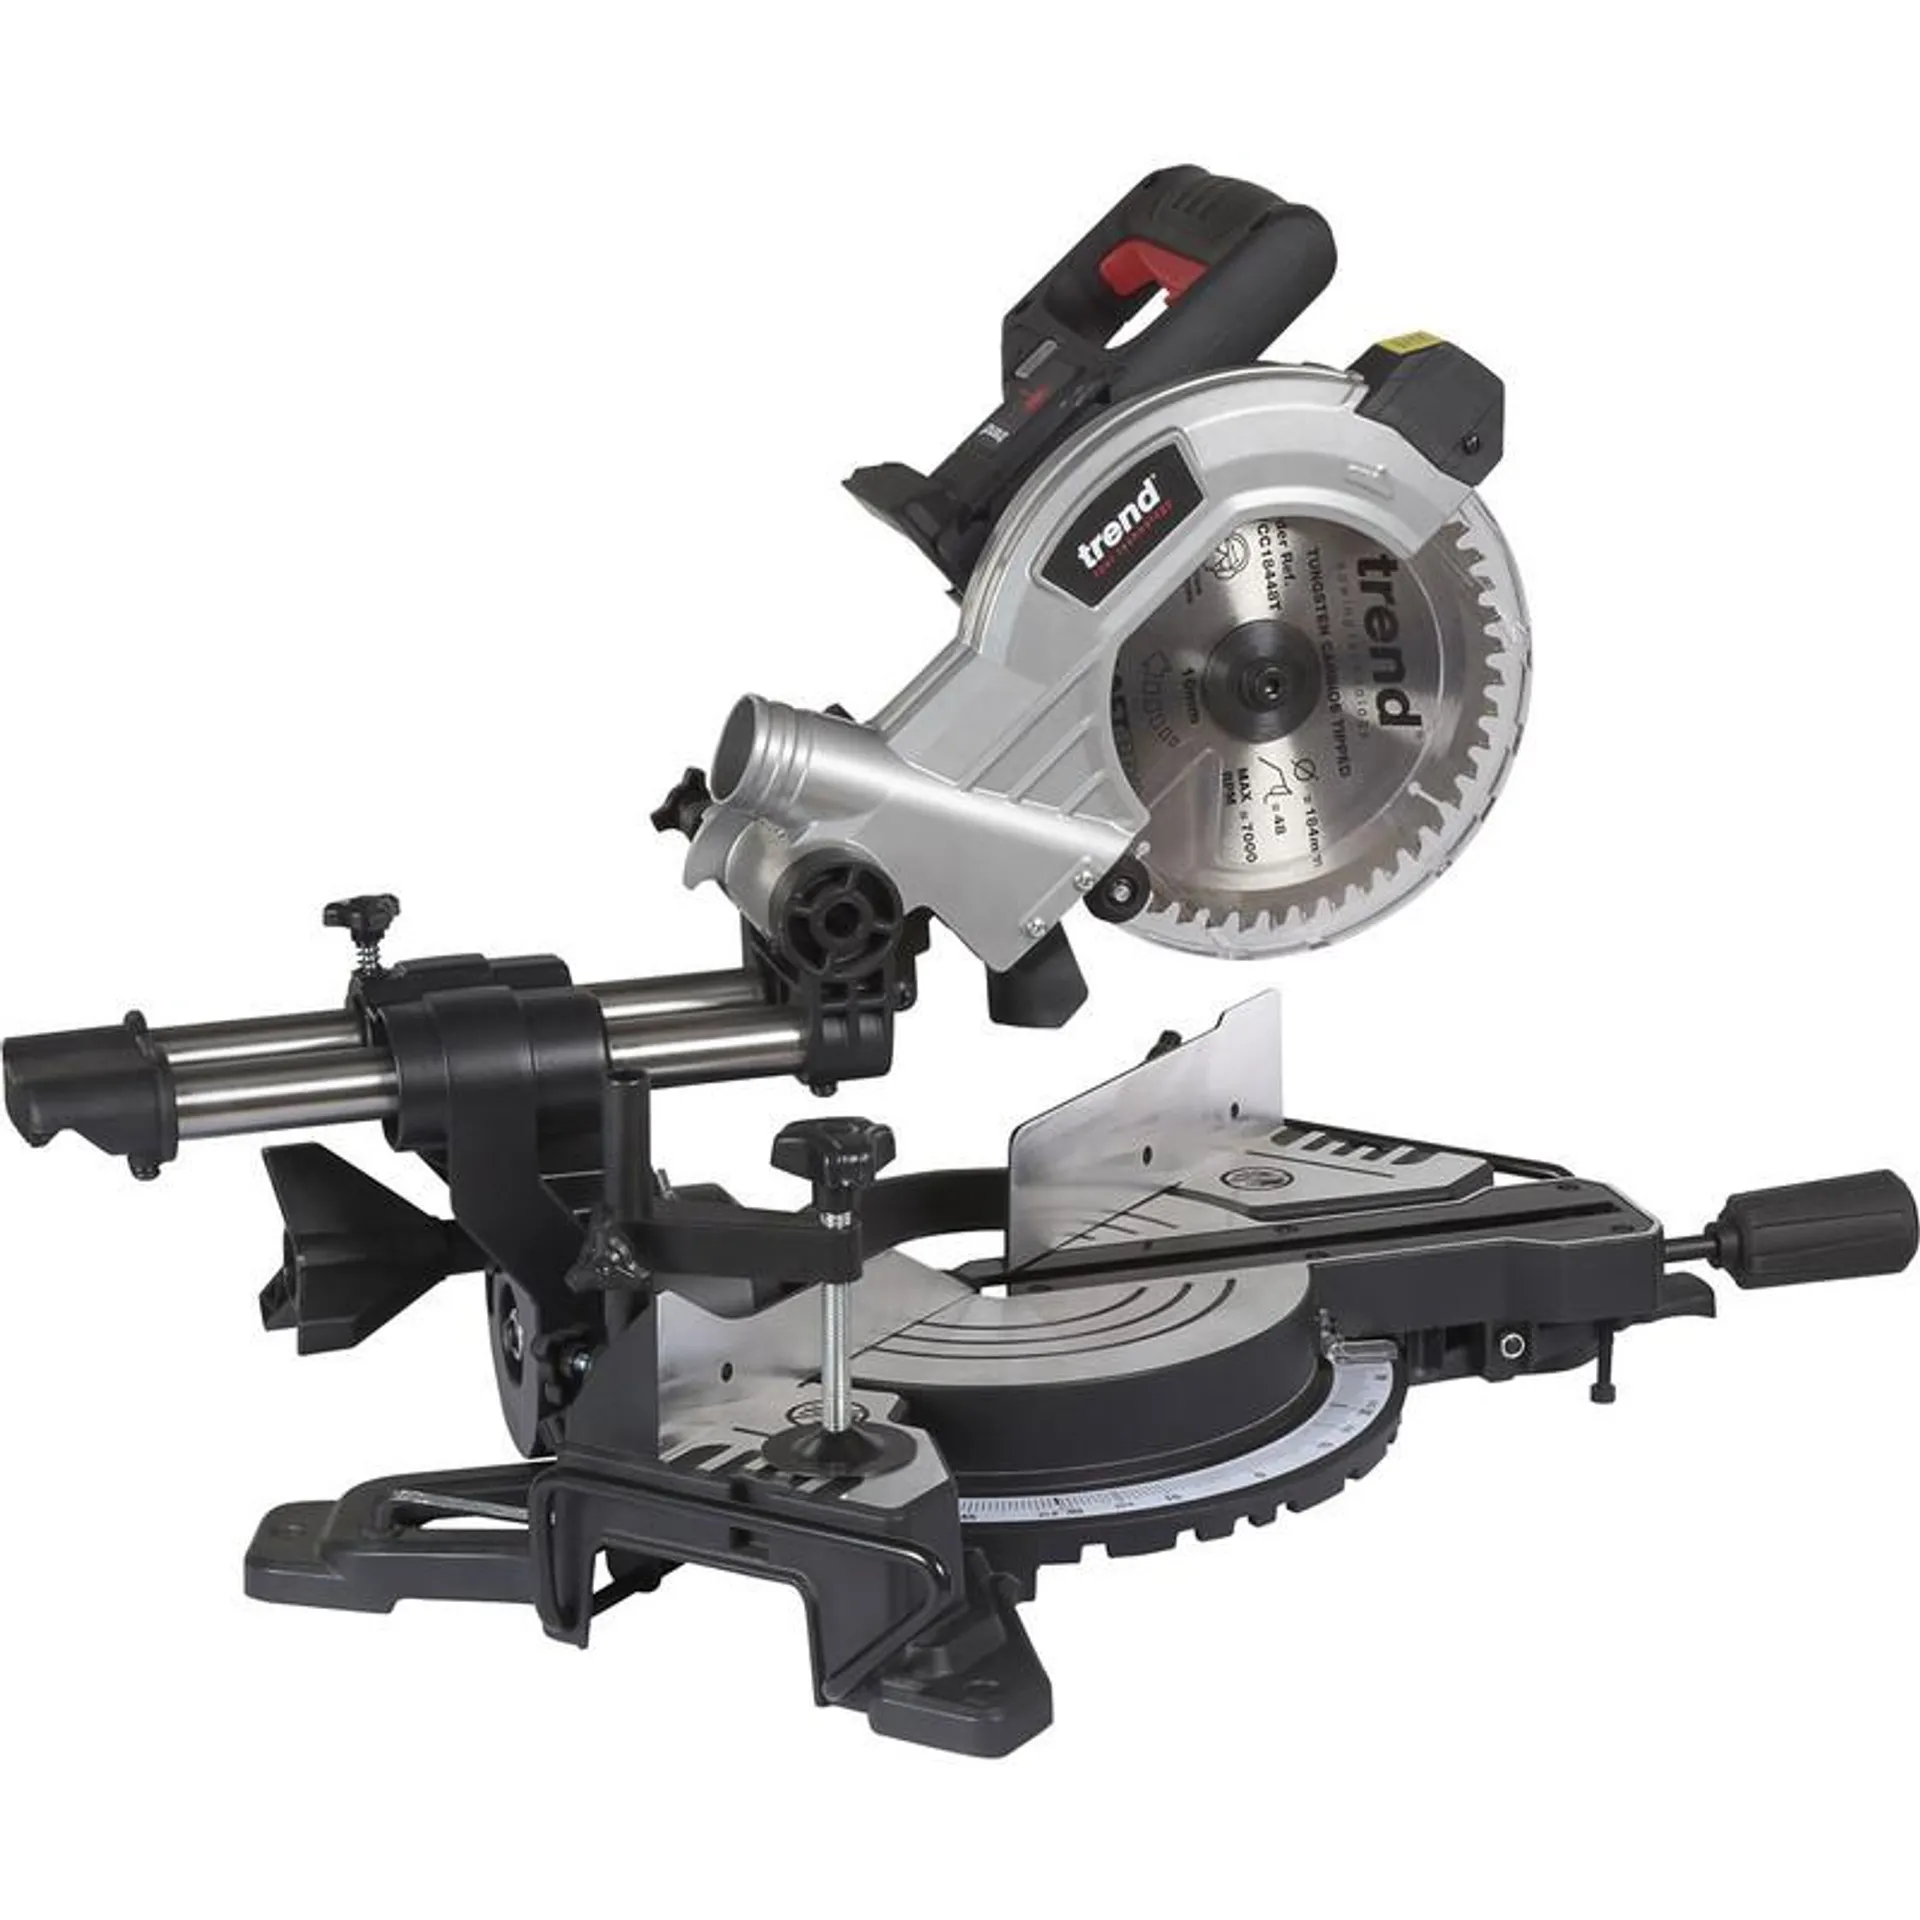 Trend T18S/MS184 18V Cordless 184mm Mitre Saw Body Only